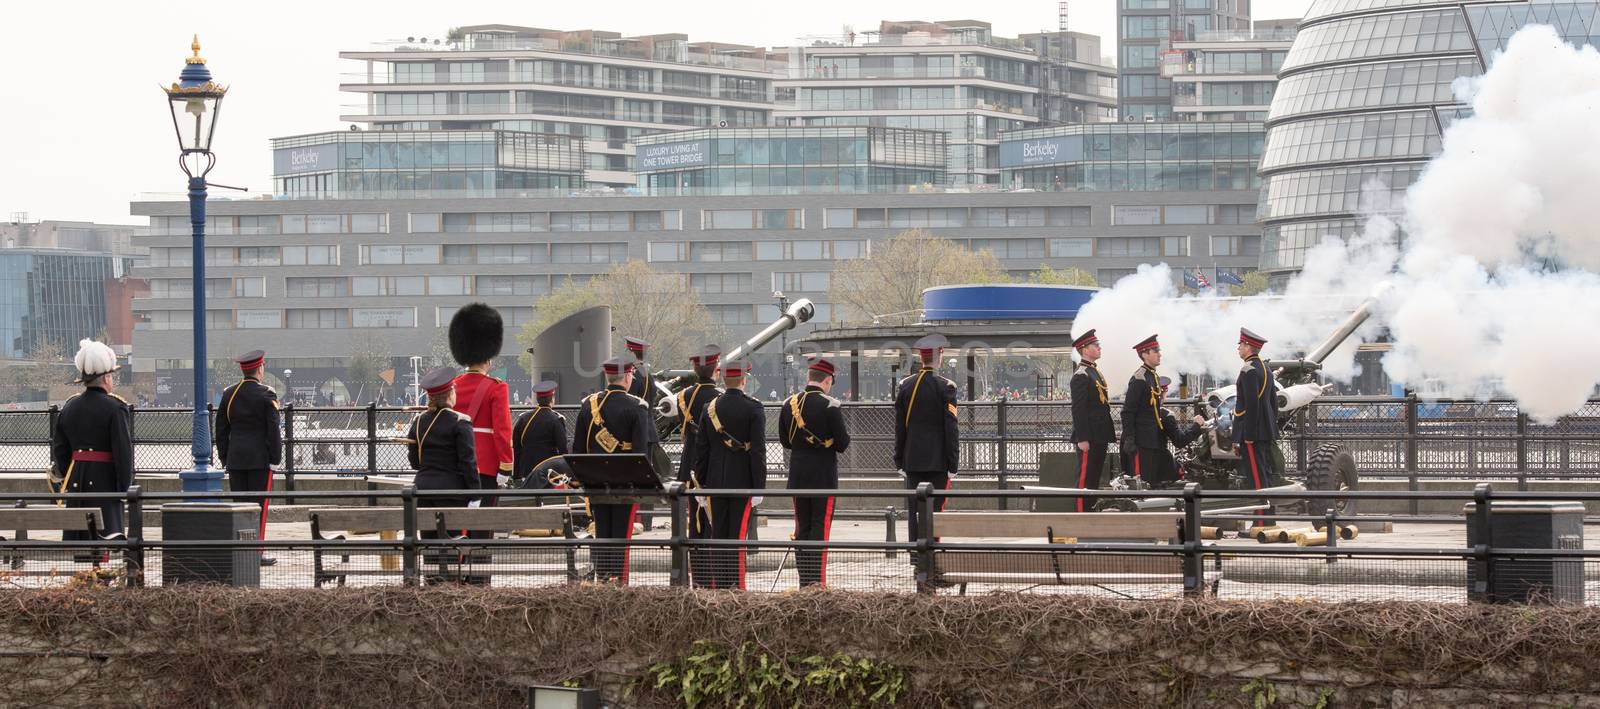 UK, London: The Honourable Artillery Company fires artillery during a 62 gun salute in London for  Queen Elizabeth II 90th birthday on April 21, 2016.Thousands of spectators lined the river for the ceremony. The Queen is the longest reigning monarch in British history. 